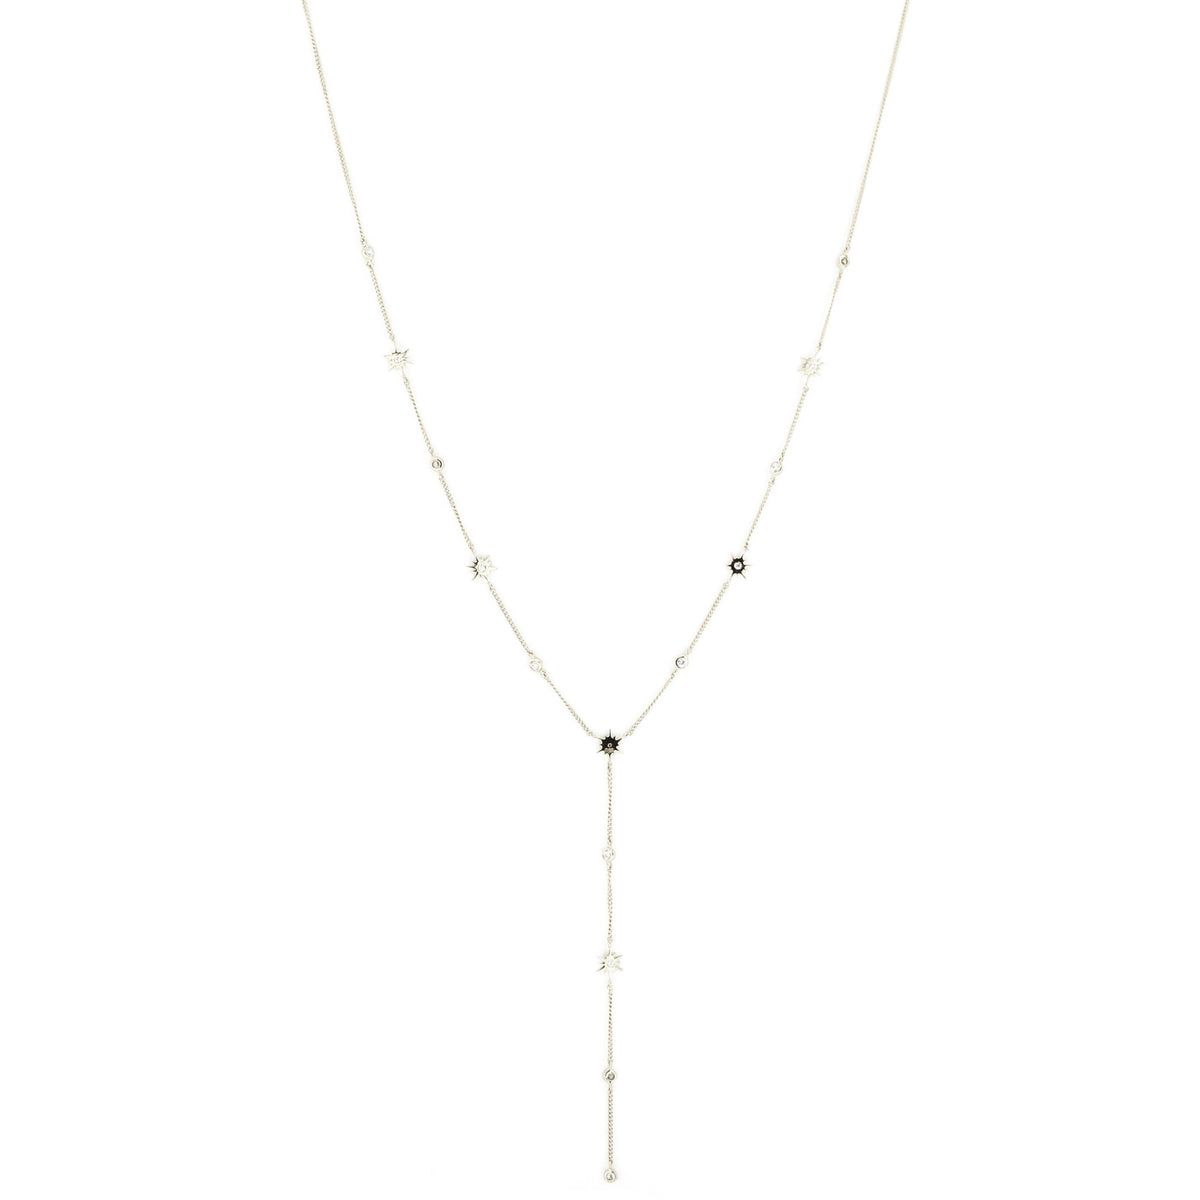 TINY BELIEVE Y NECKLACE - CUBIC ZIRCONIA &amp; SILVER - SO PRETTY CARA COTTER